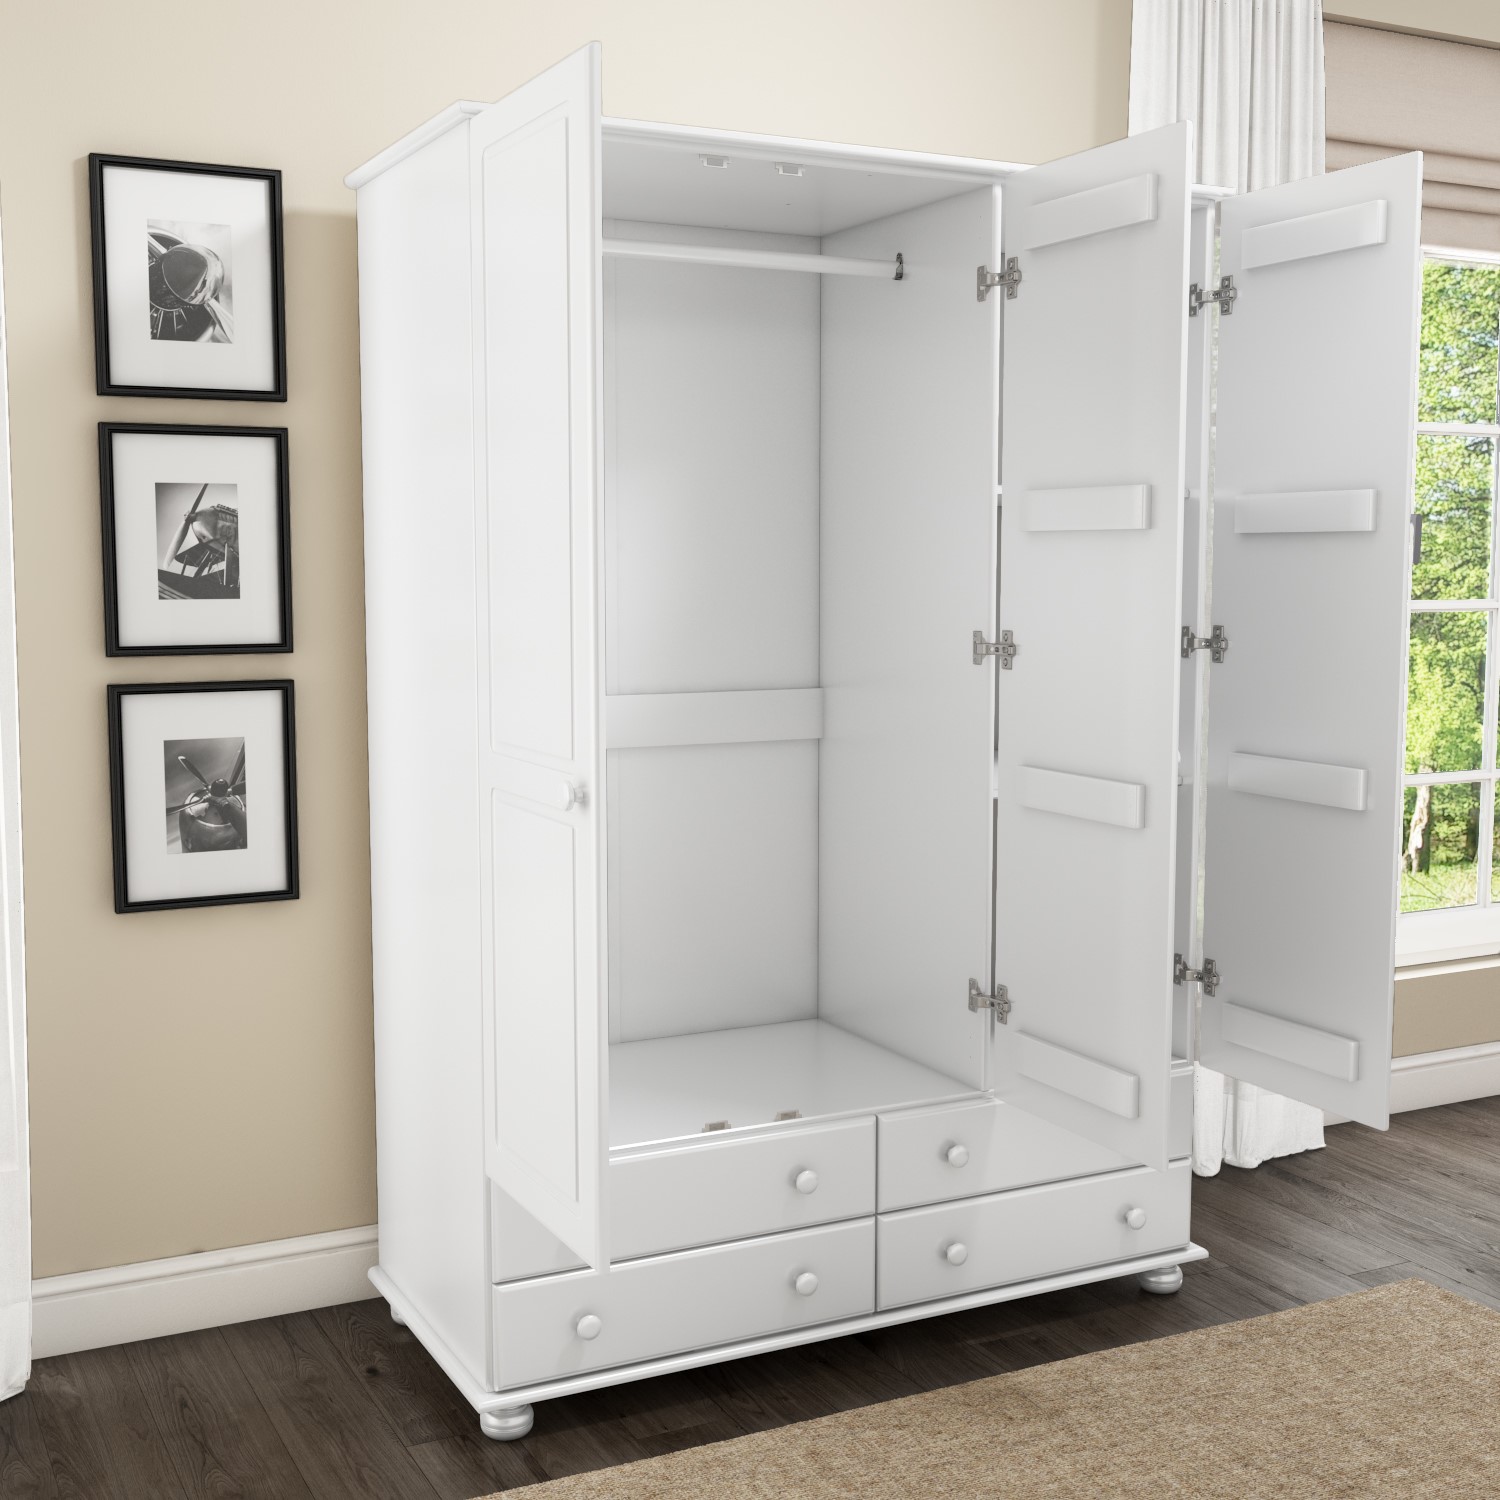 Read more about White painted pine 3 door triple wardrobe with drawers hamilton